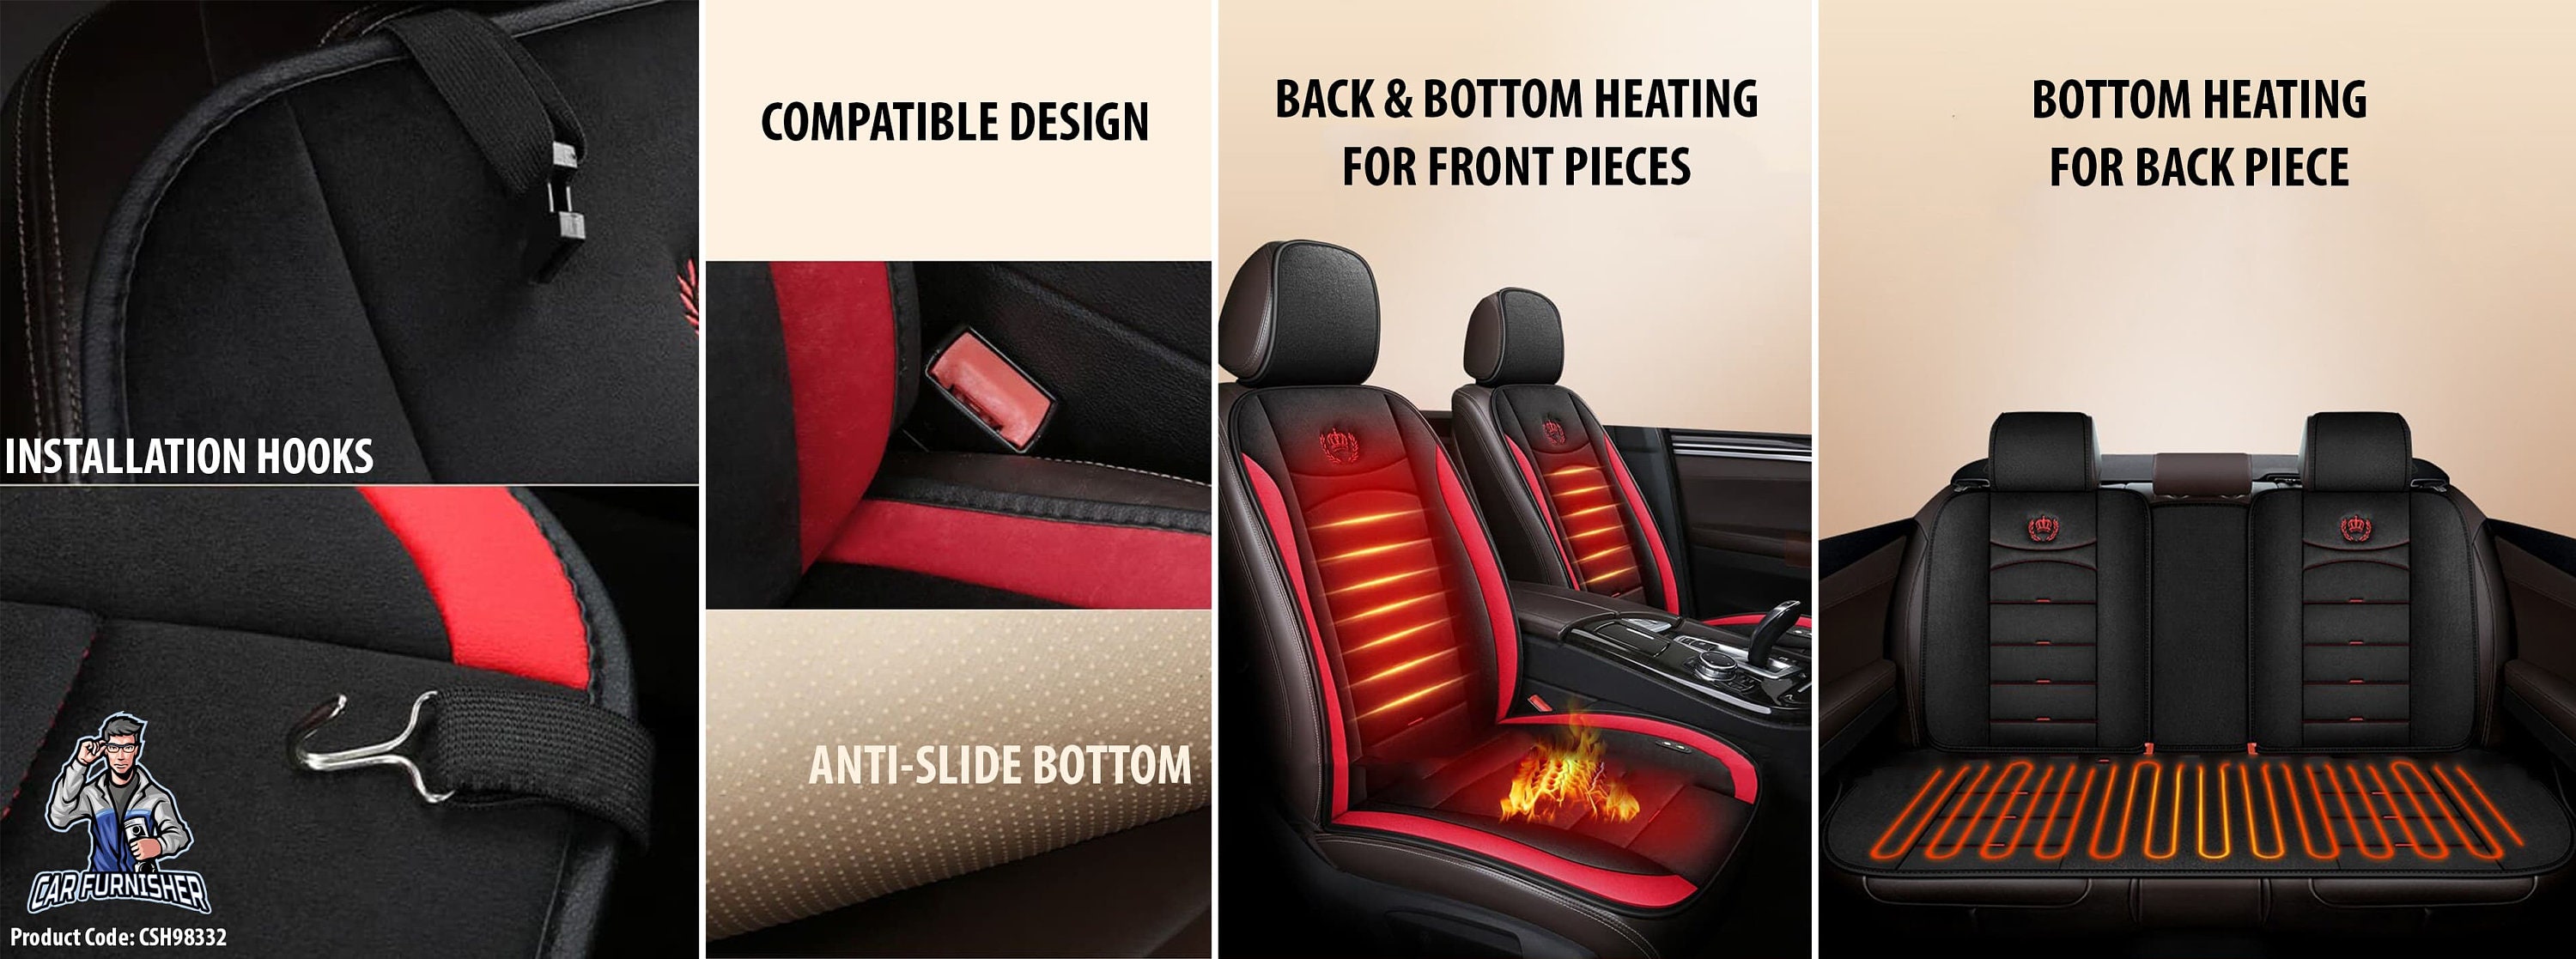 Car Seat Heater Car Seat Cover (4 Colors) Front Seat